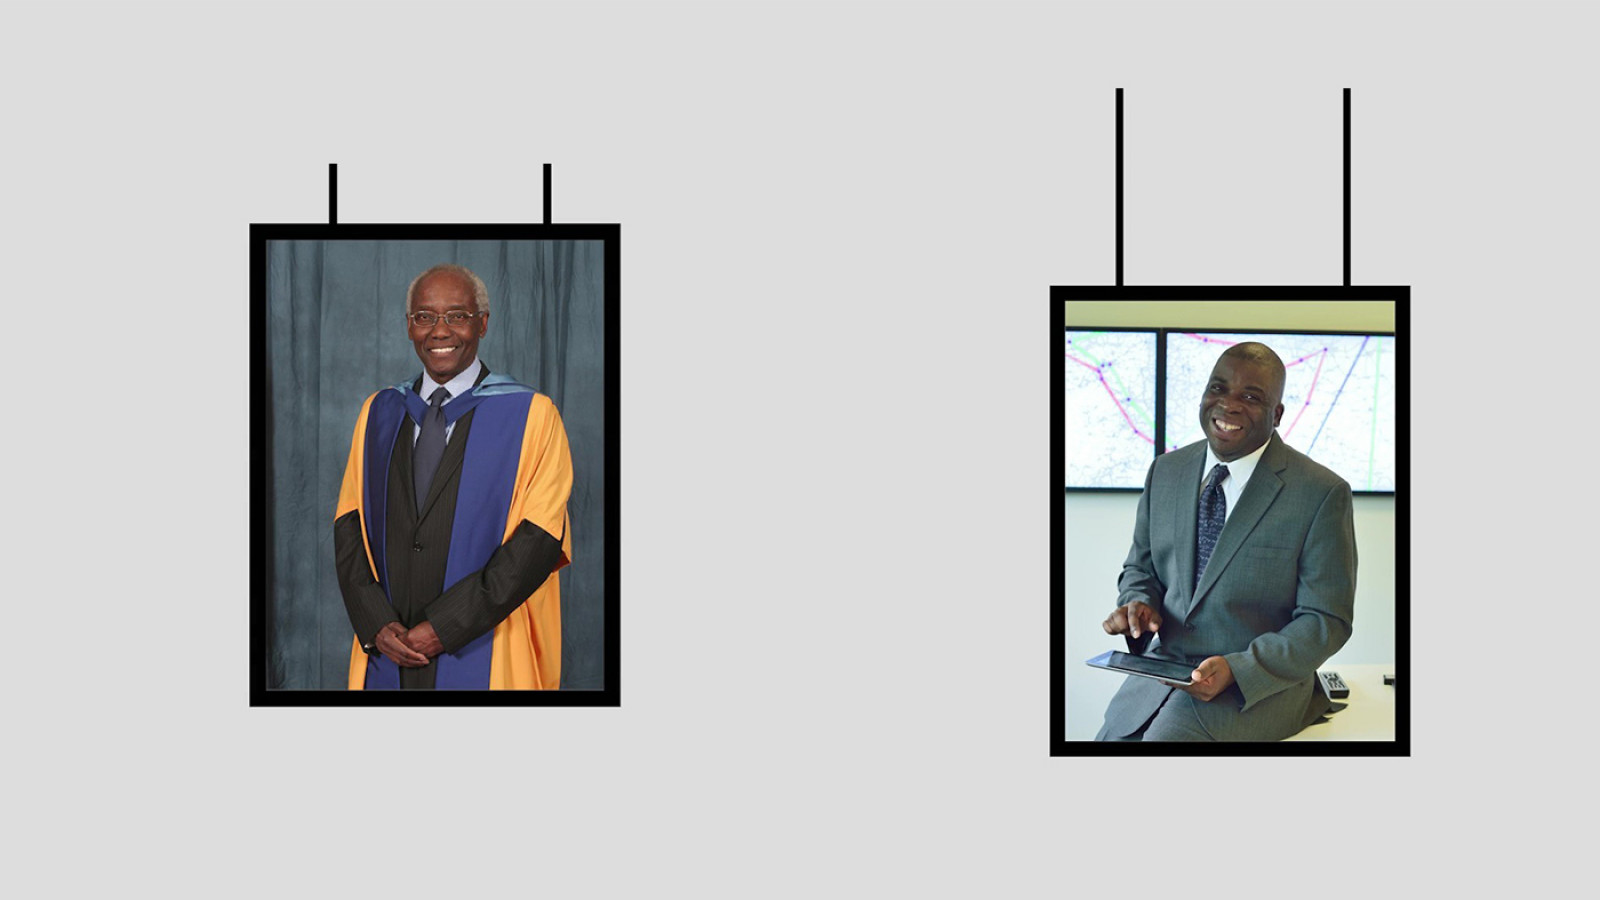 Two images of men in digital frames on a grey background. Each man smiles. One stands wearing a university robe of gold and navy over a dark suit. The other sits on the edge of a desk wearing a grey suit and holding an Ipad.